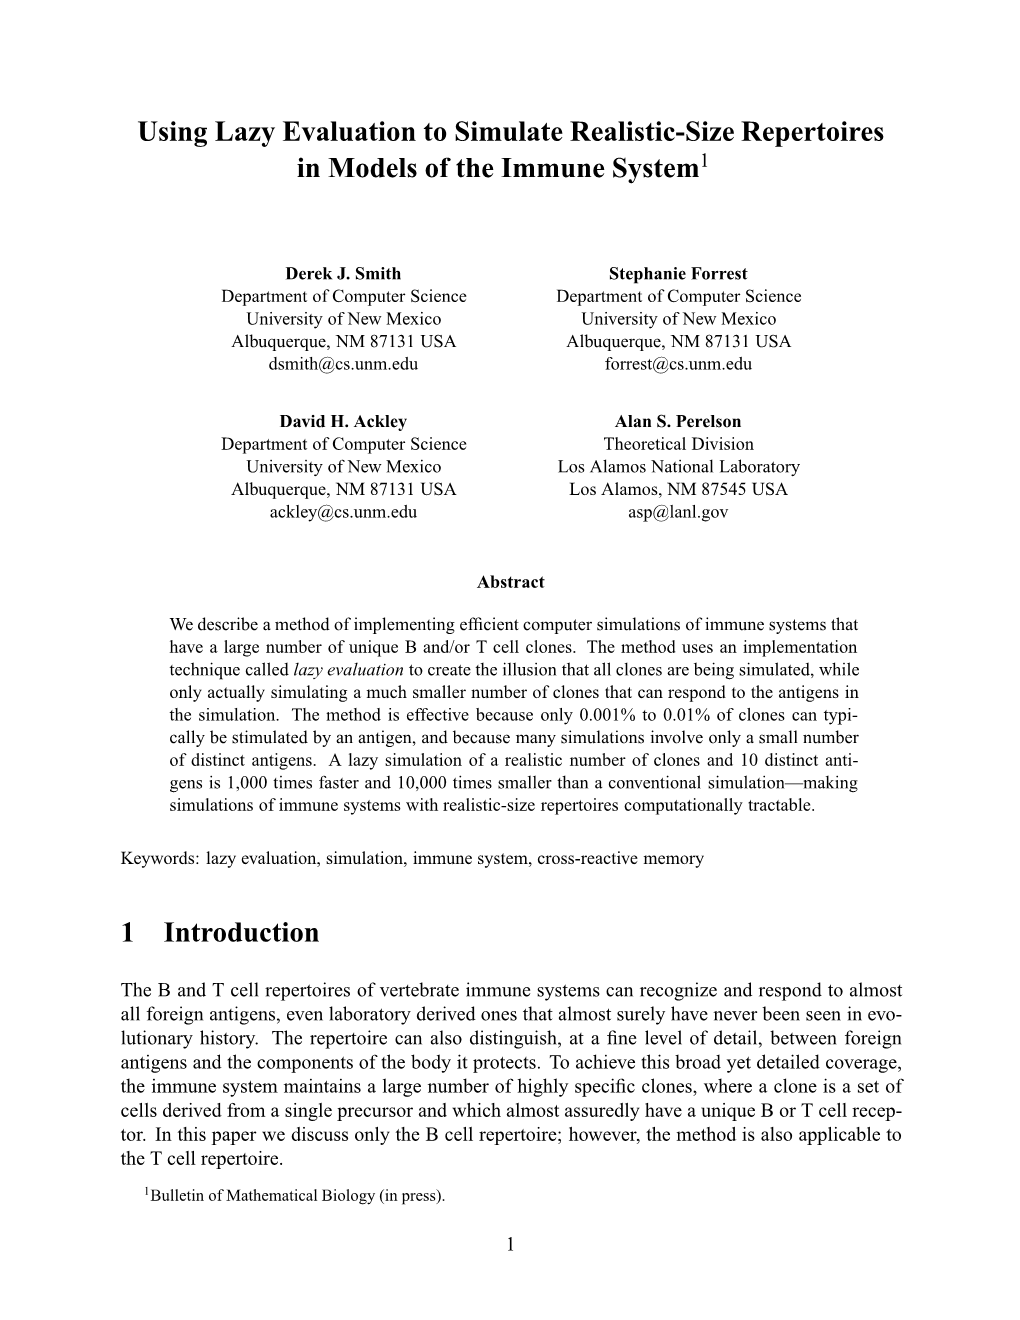 Using Lazy Evaluation to Simulate Realistic-Size Repertoires in Models of the Immune System1